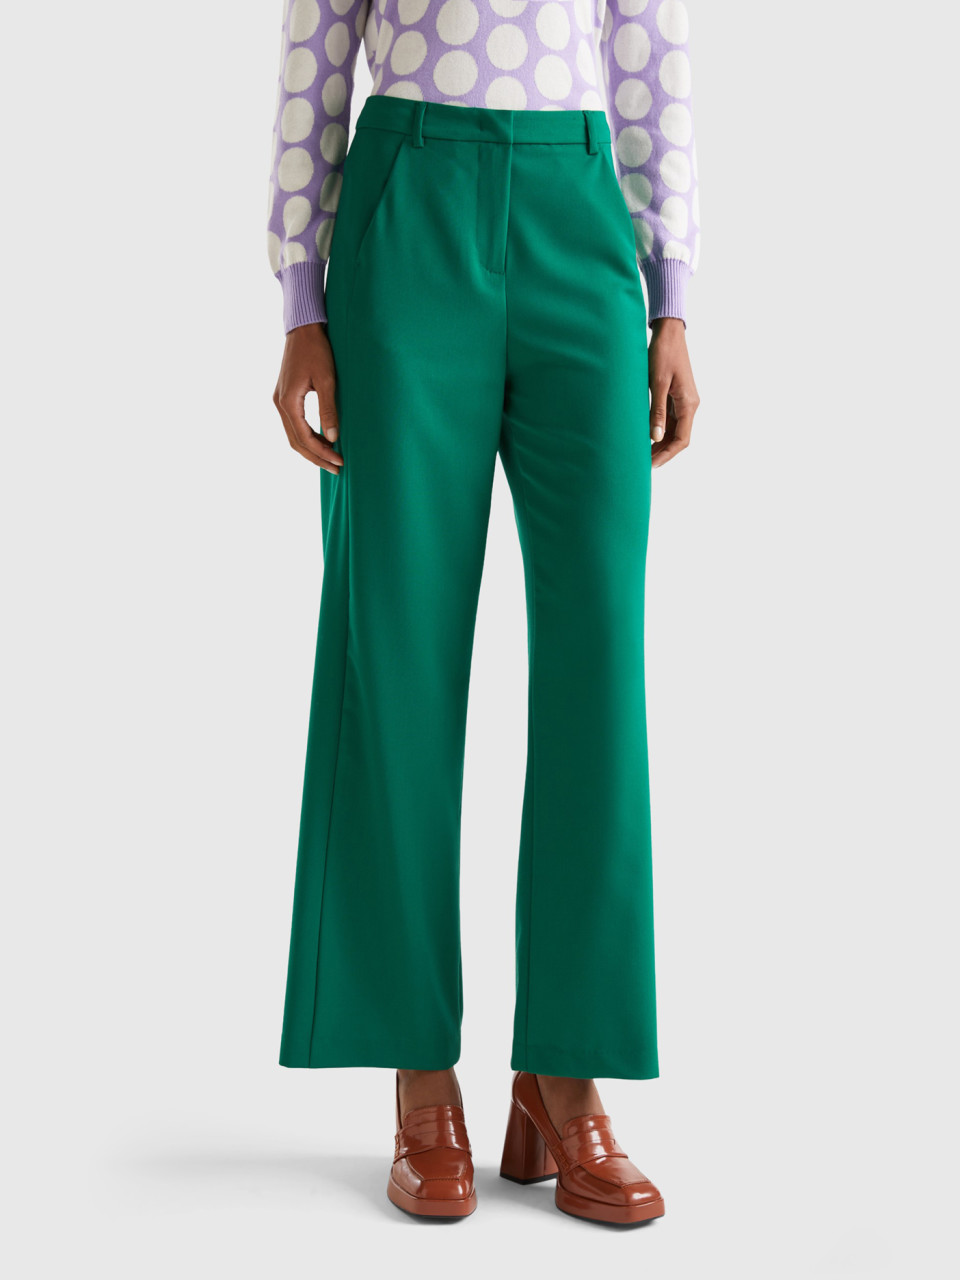 Benetton, Flowy Trousers With Tapered Leg, Green, Women